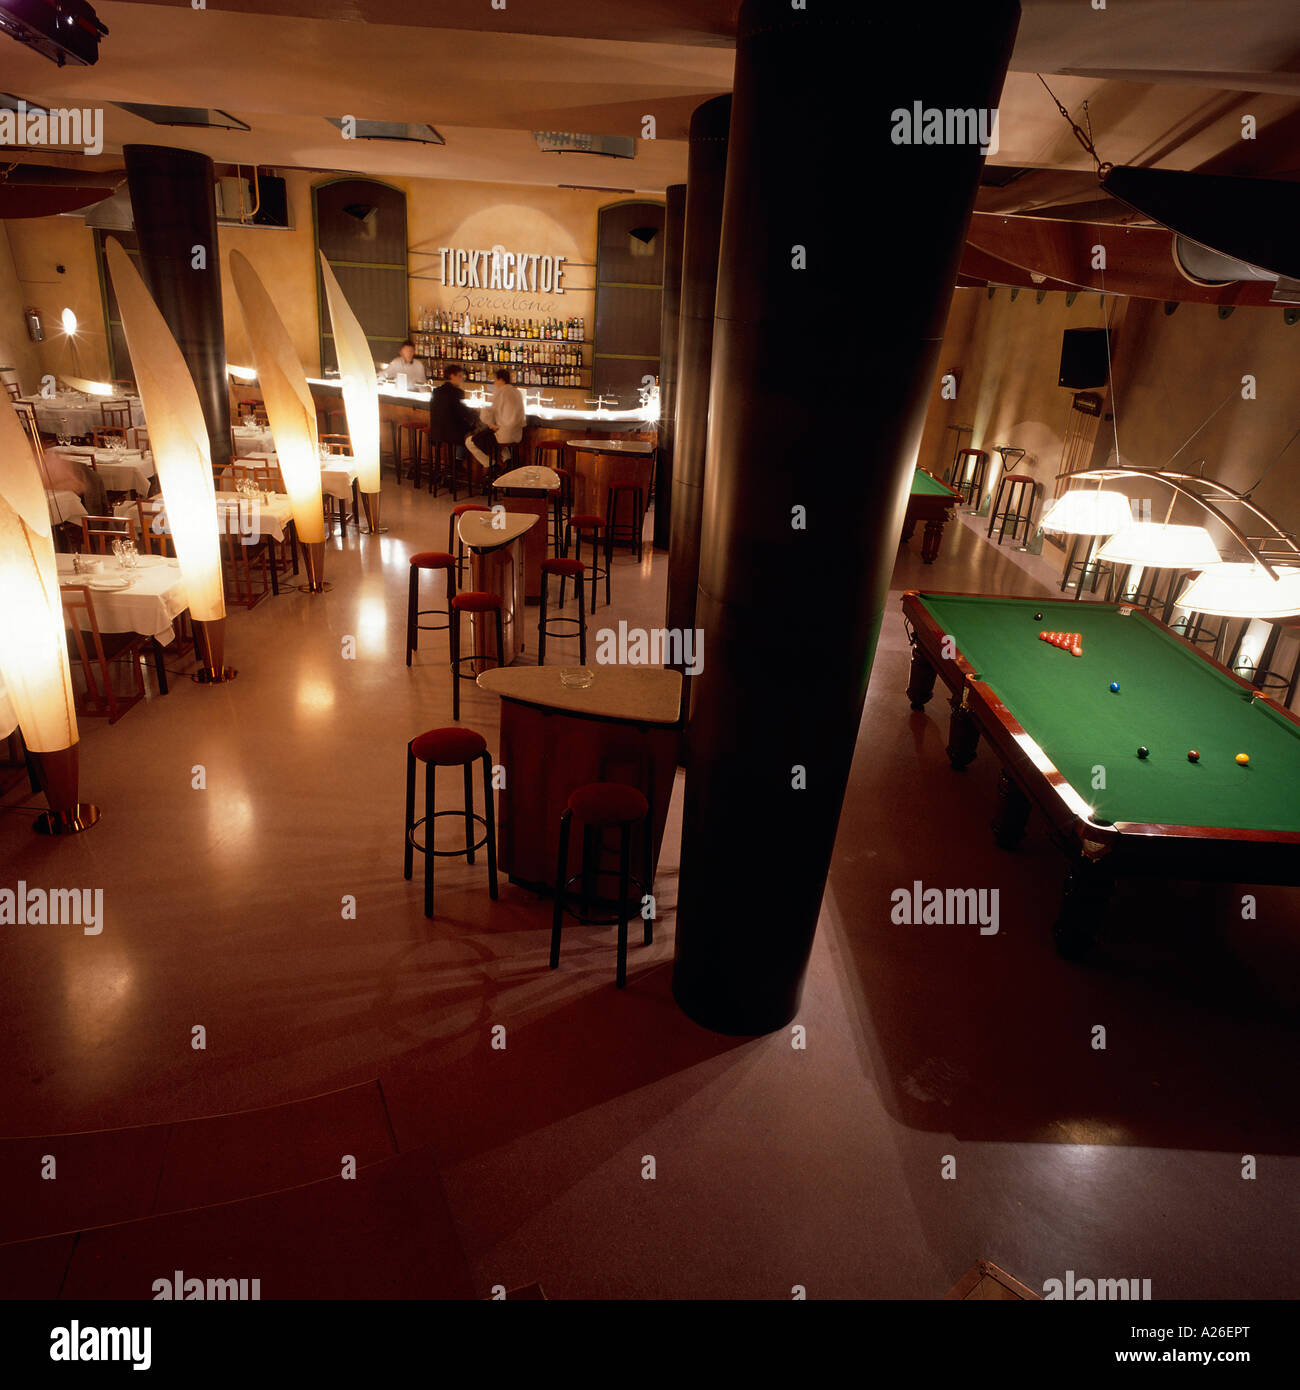 View Of A Well Designed Restaurant With A Billiard Table Stock Photo Alamy